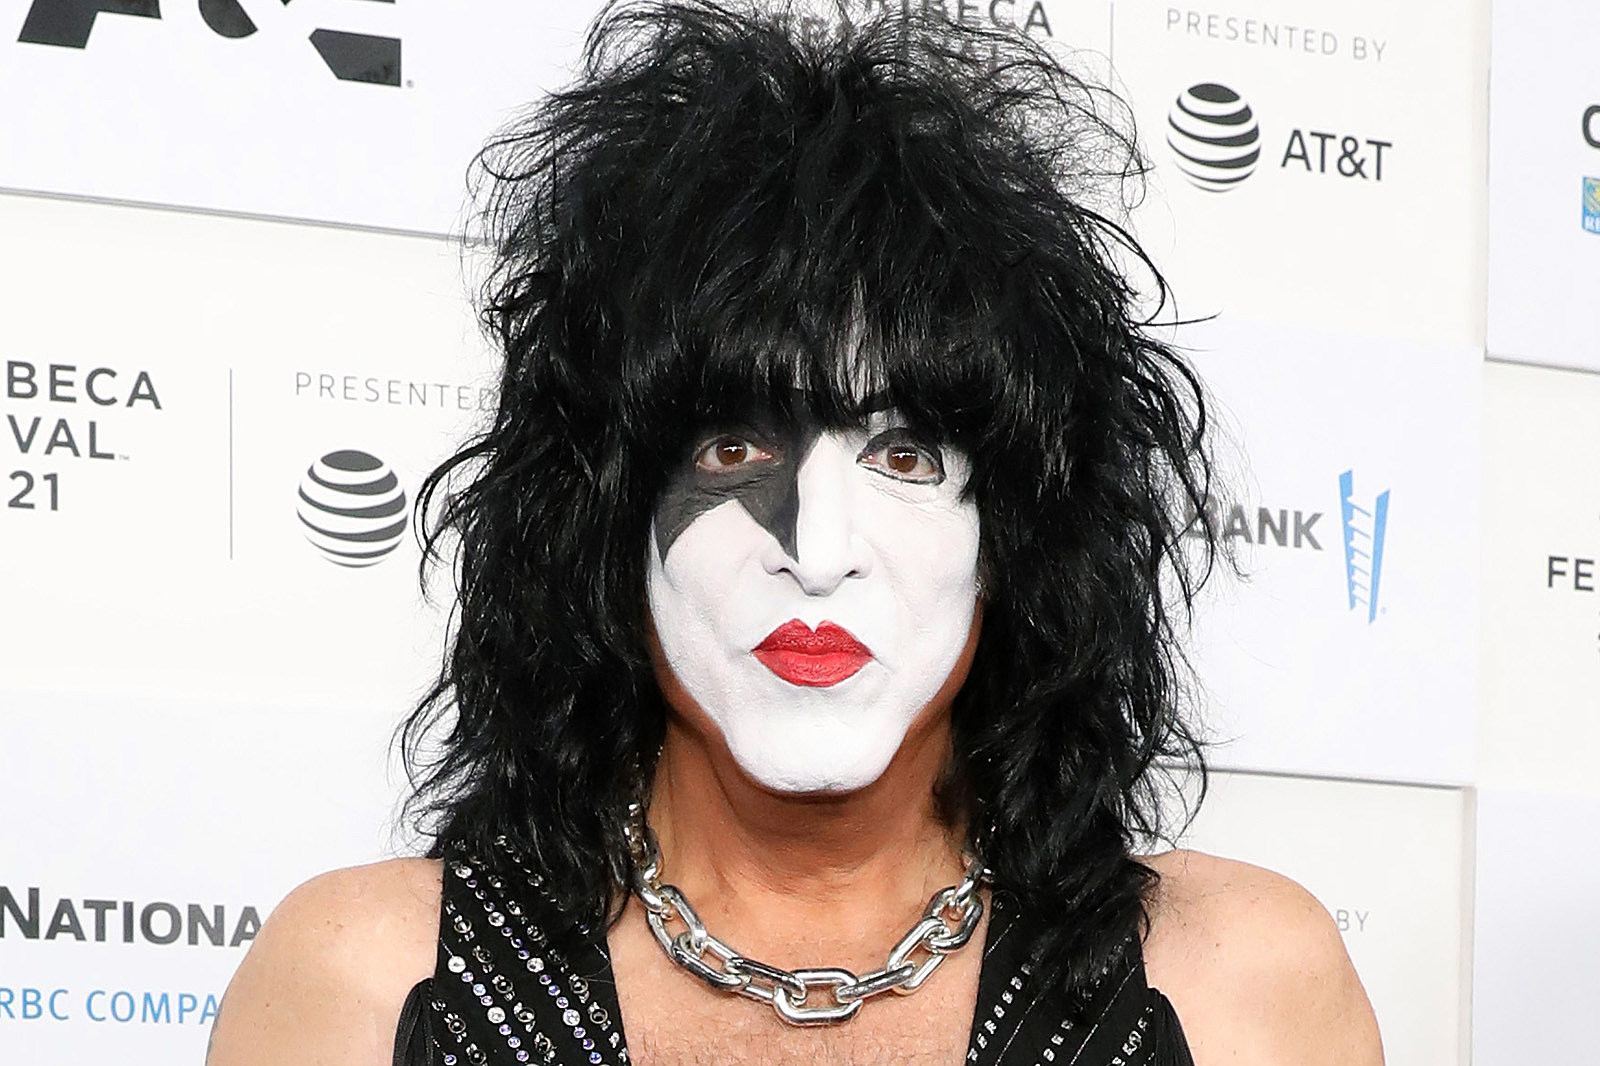 It's settled: James Hetfield had the best Halloween costume this